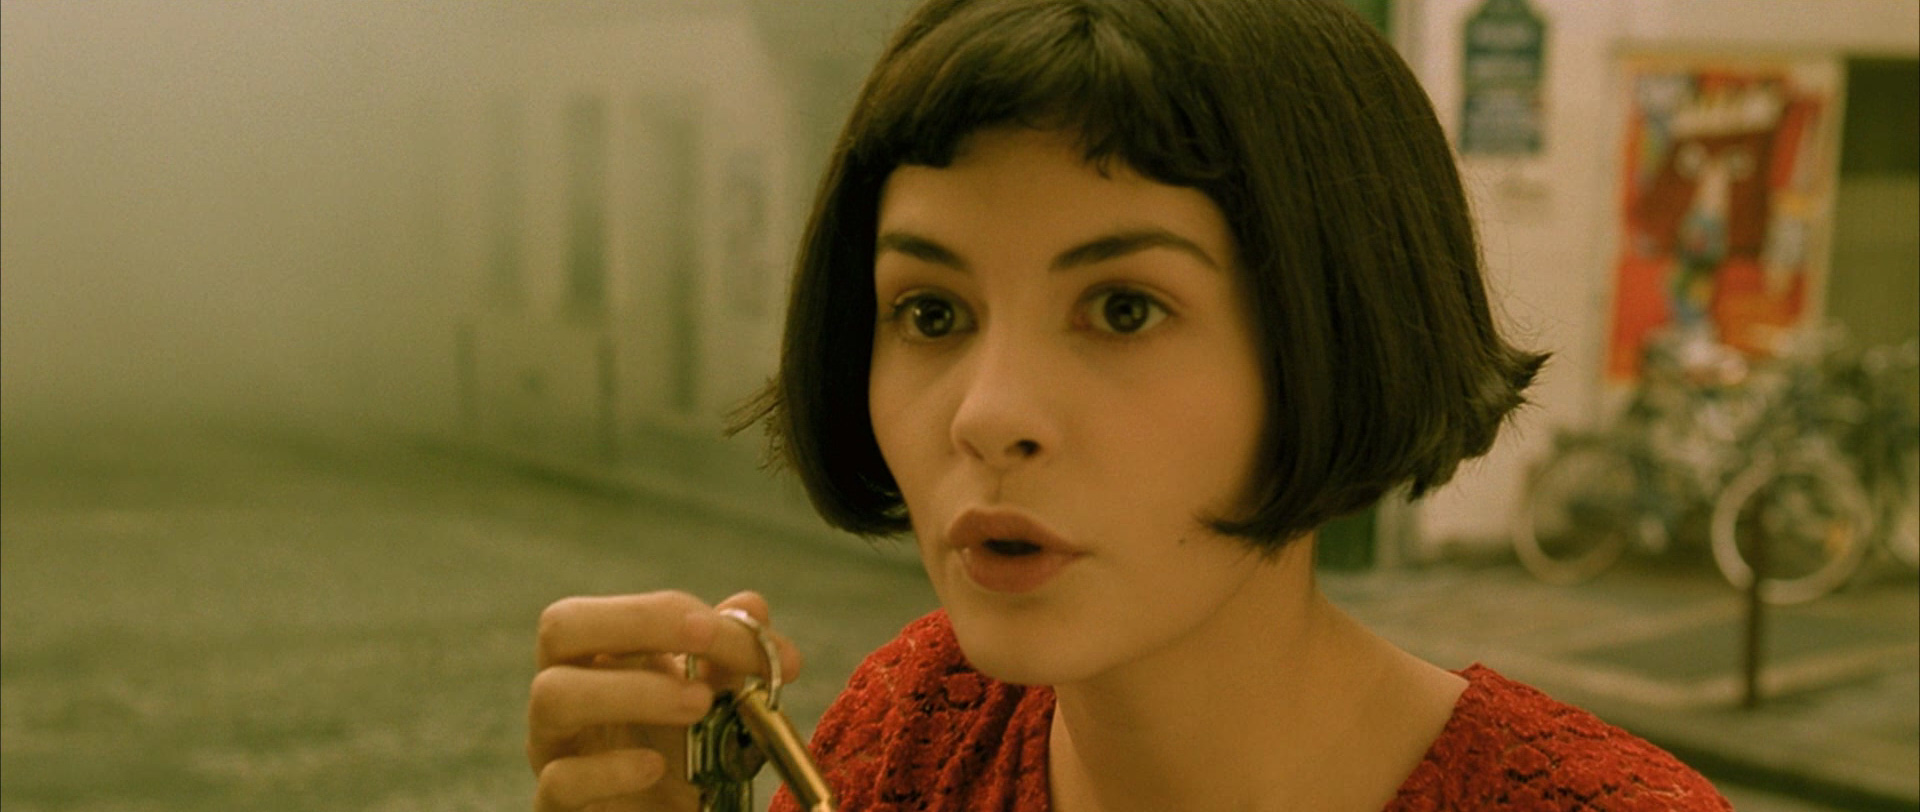 Images of Amelie | 1920x812